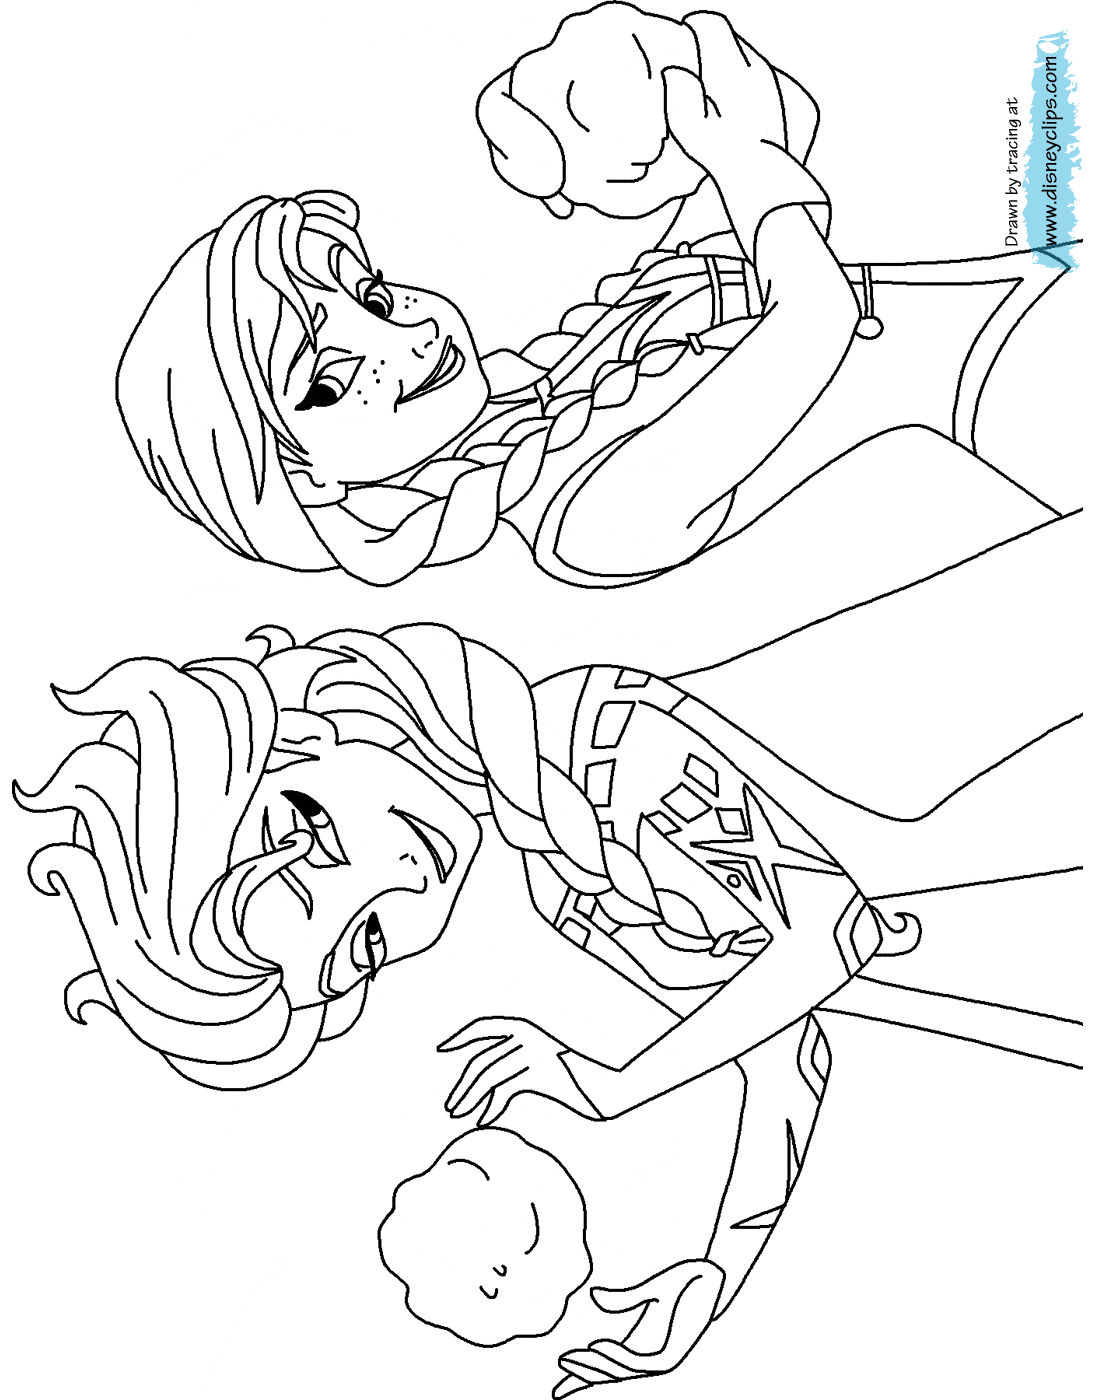 anna and elsa frozen coloring pages disney39s frozen coloring pages 2 disneyclipscom elsa and coloring frozen anna pages 